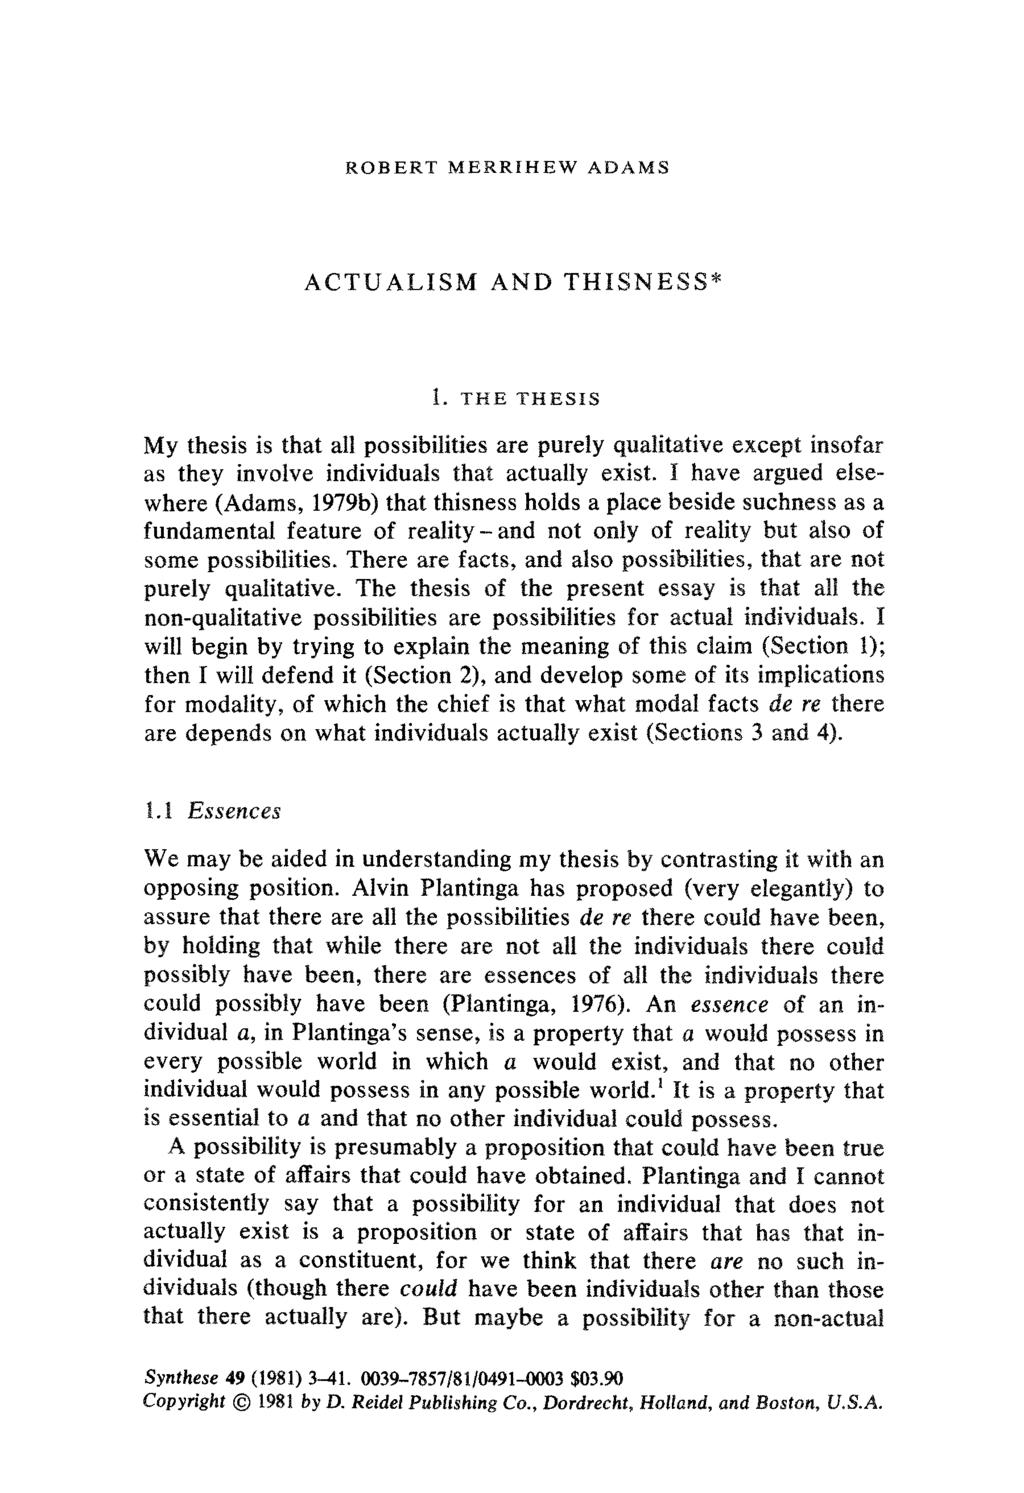 ROBERT MERRIHEW ADAMS ACTUALISM AND THISNESS* I. THE THESIS My thesis is that all possibilities are purely qualitative except insofar as they involve individuals that actually exist.